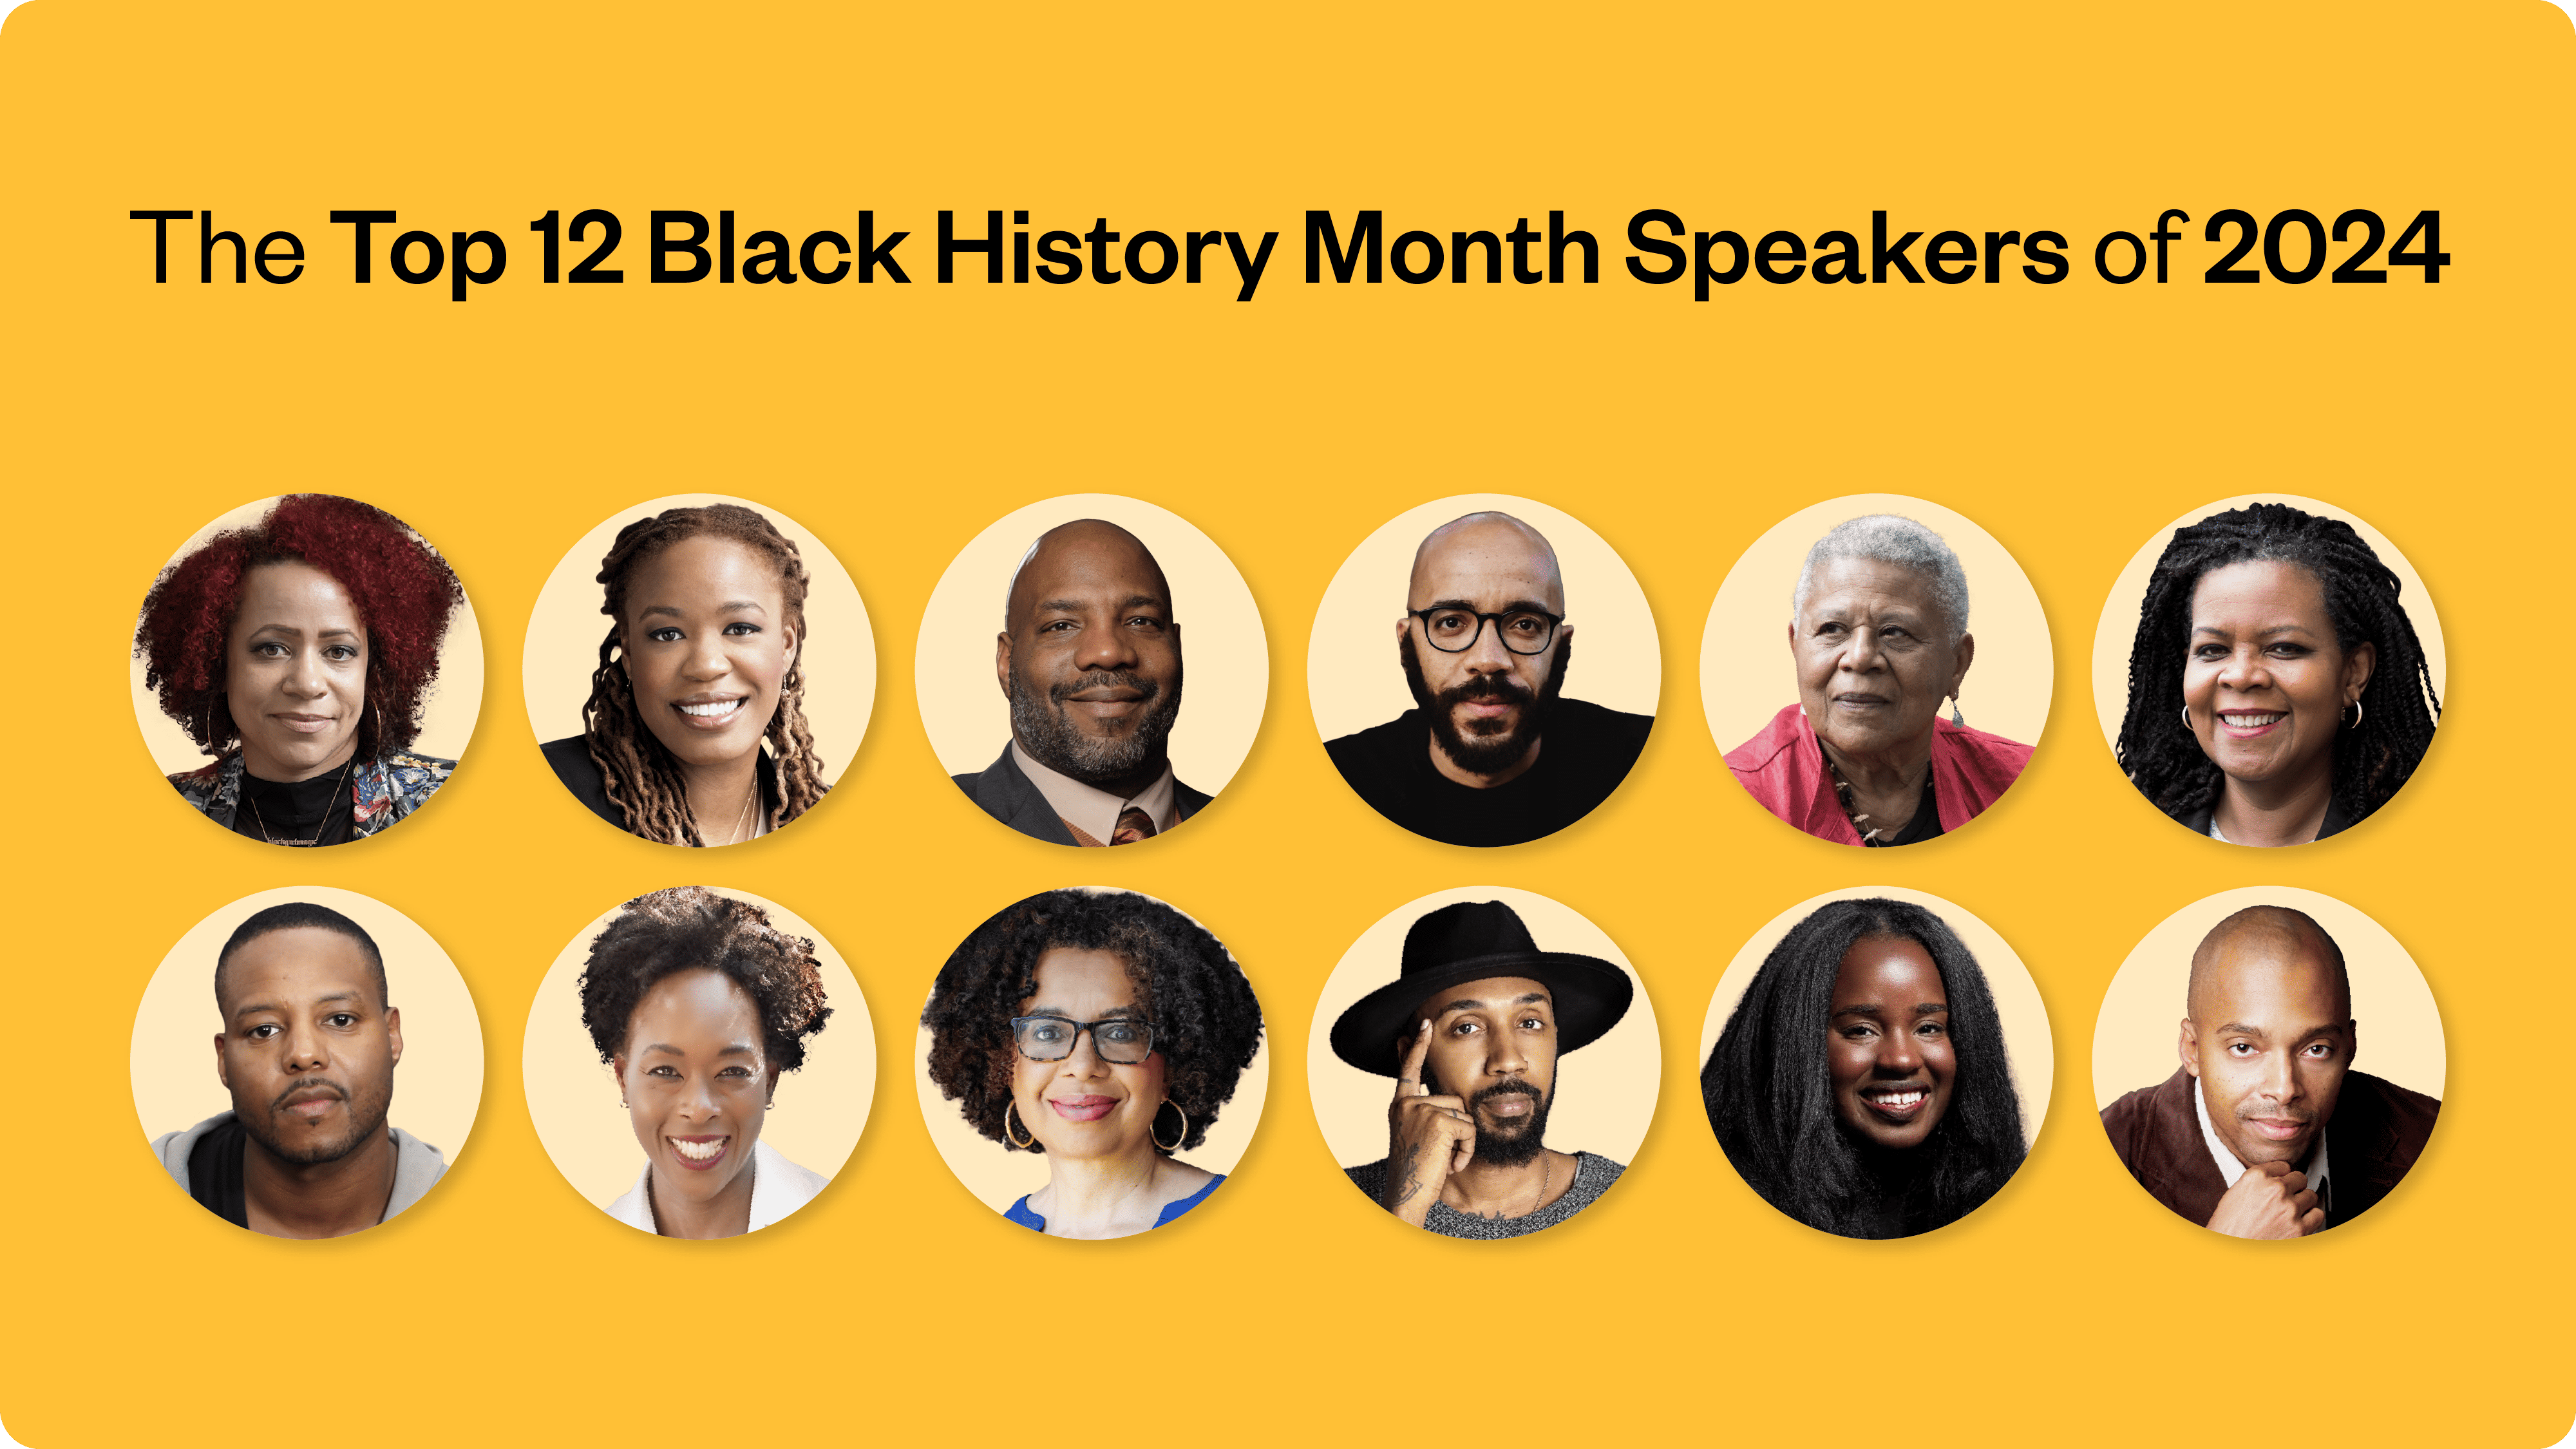 Black History Month is More Important Now Than Ever Before. The 12 Top BHM Speakers on The Past, Present, and Future